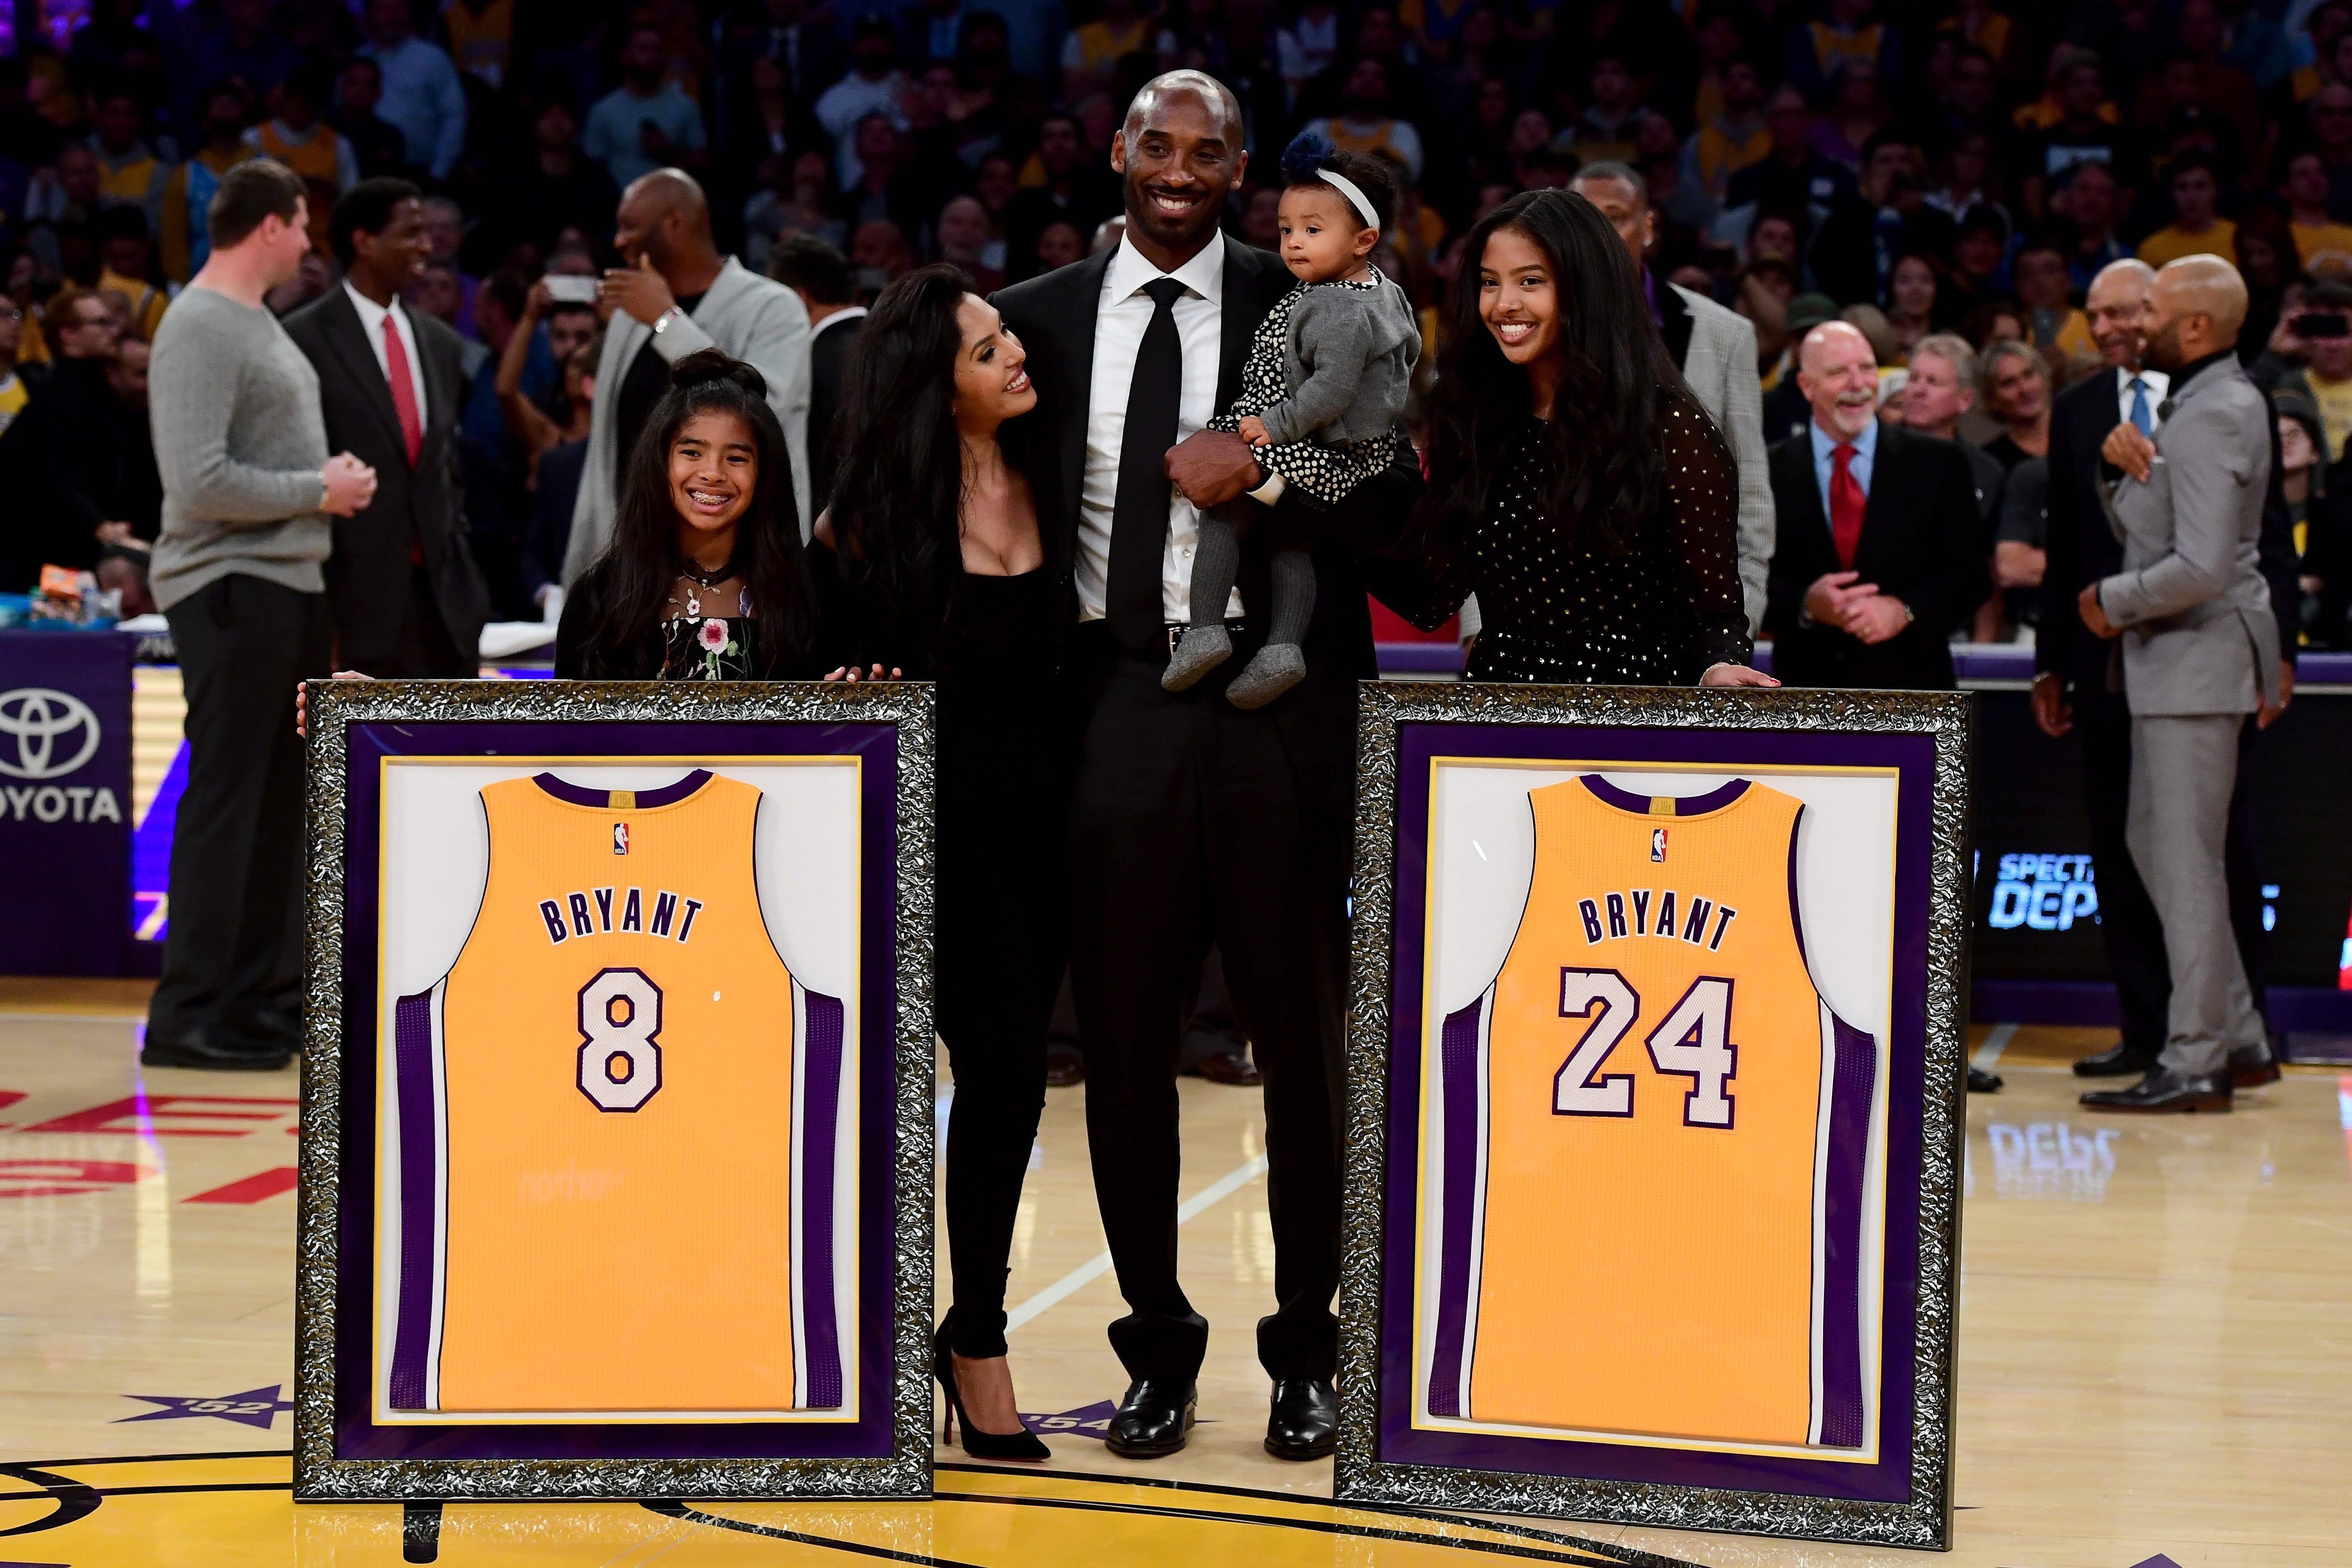 Kobe Bryant's Wife Vanessa Is Reportedly in Shock and Feels Almost Numb